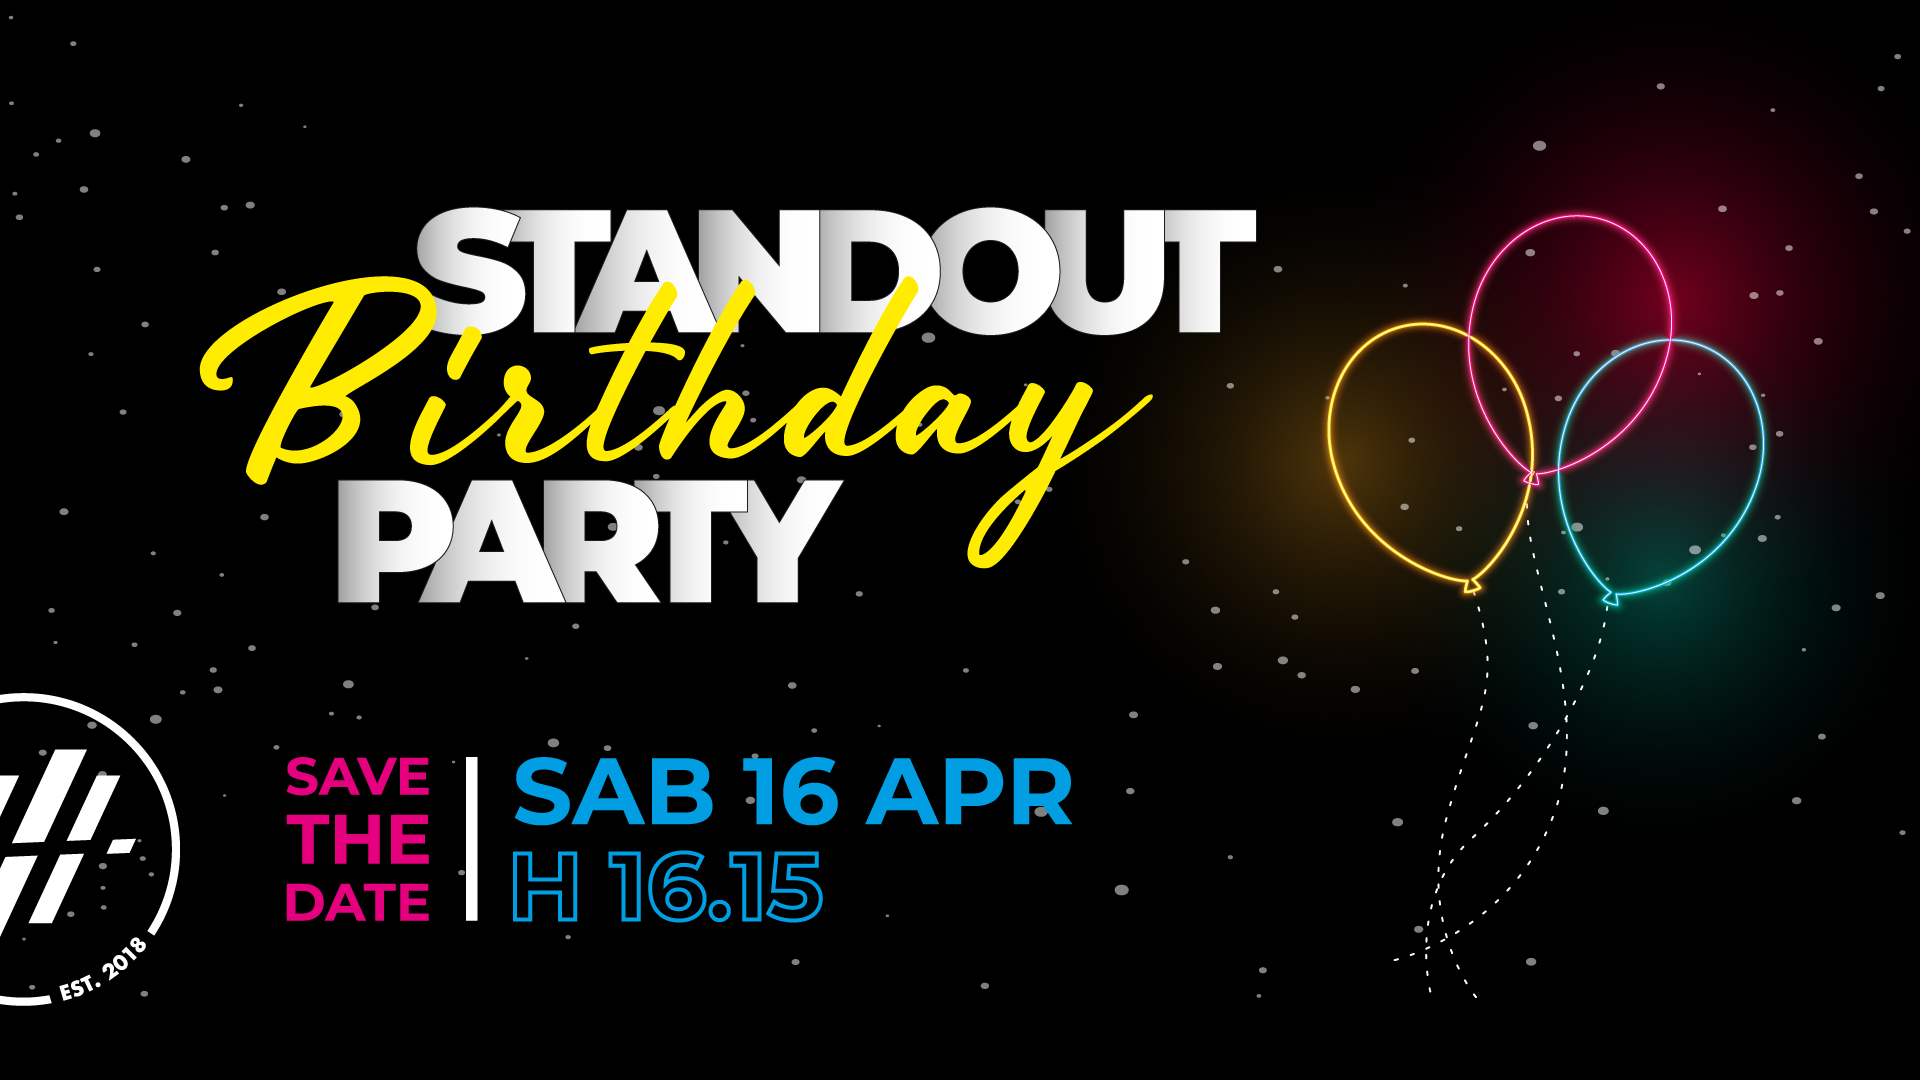 STANDOUT BIRTHDAY PARTY!